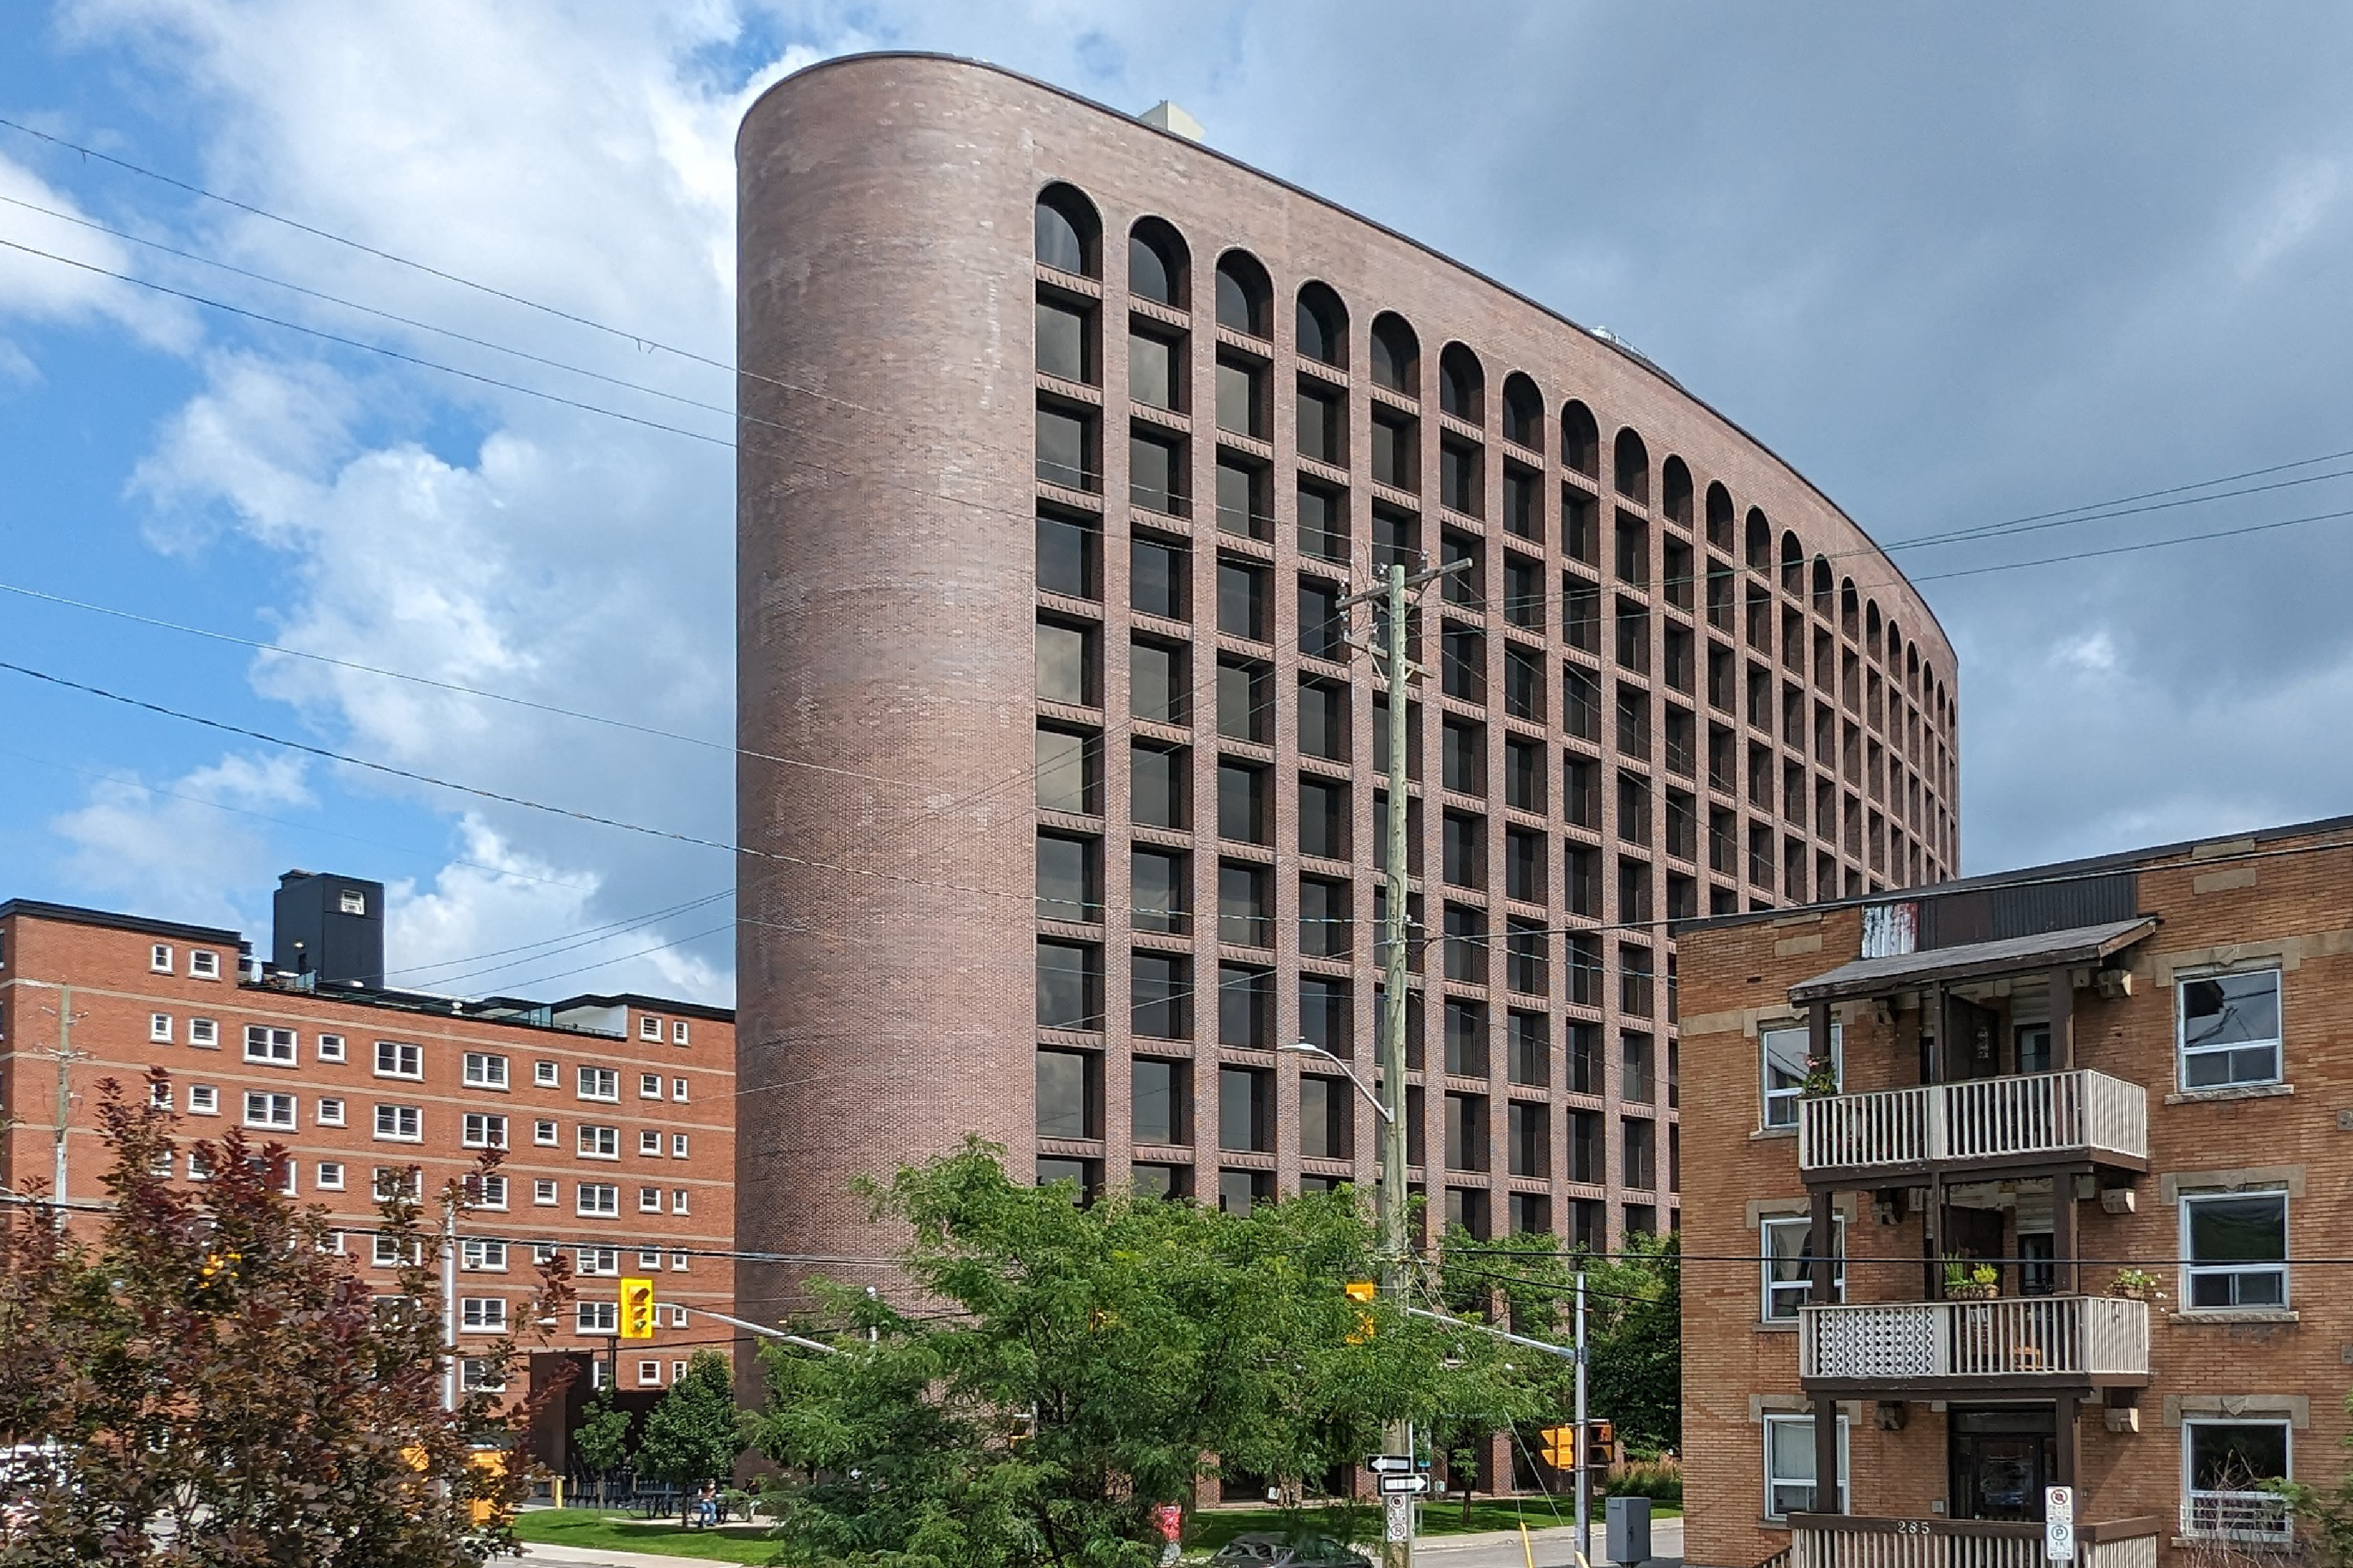 Tall and wide brown brick building in the shape of an extruded ellipse with curved walls and an orderly grid of square punch windows. The top row of windows is arched with a semicircle. Around it are 4 to 5 storey high brick buildings, rectangular in shape.